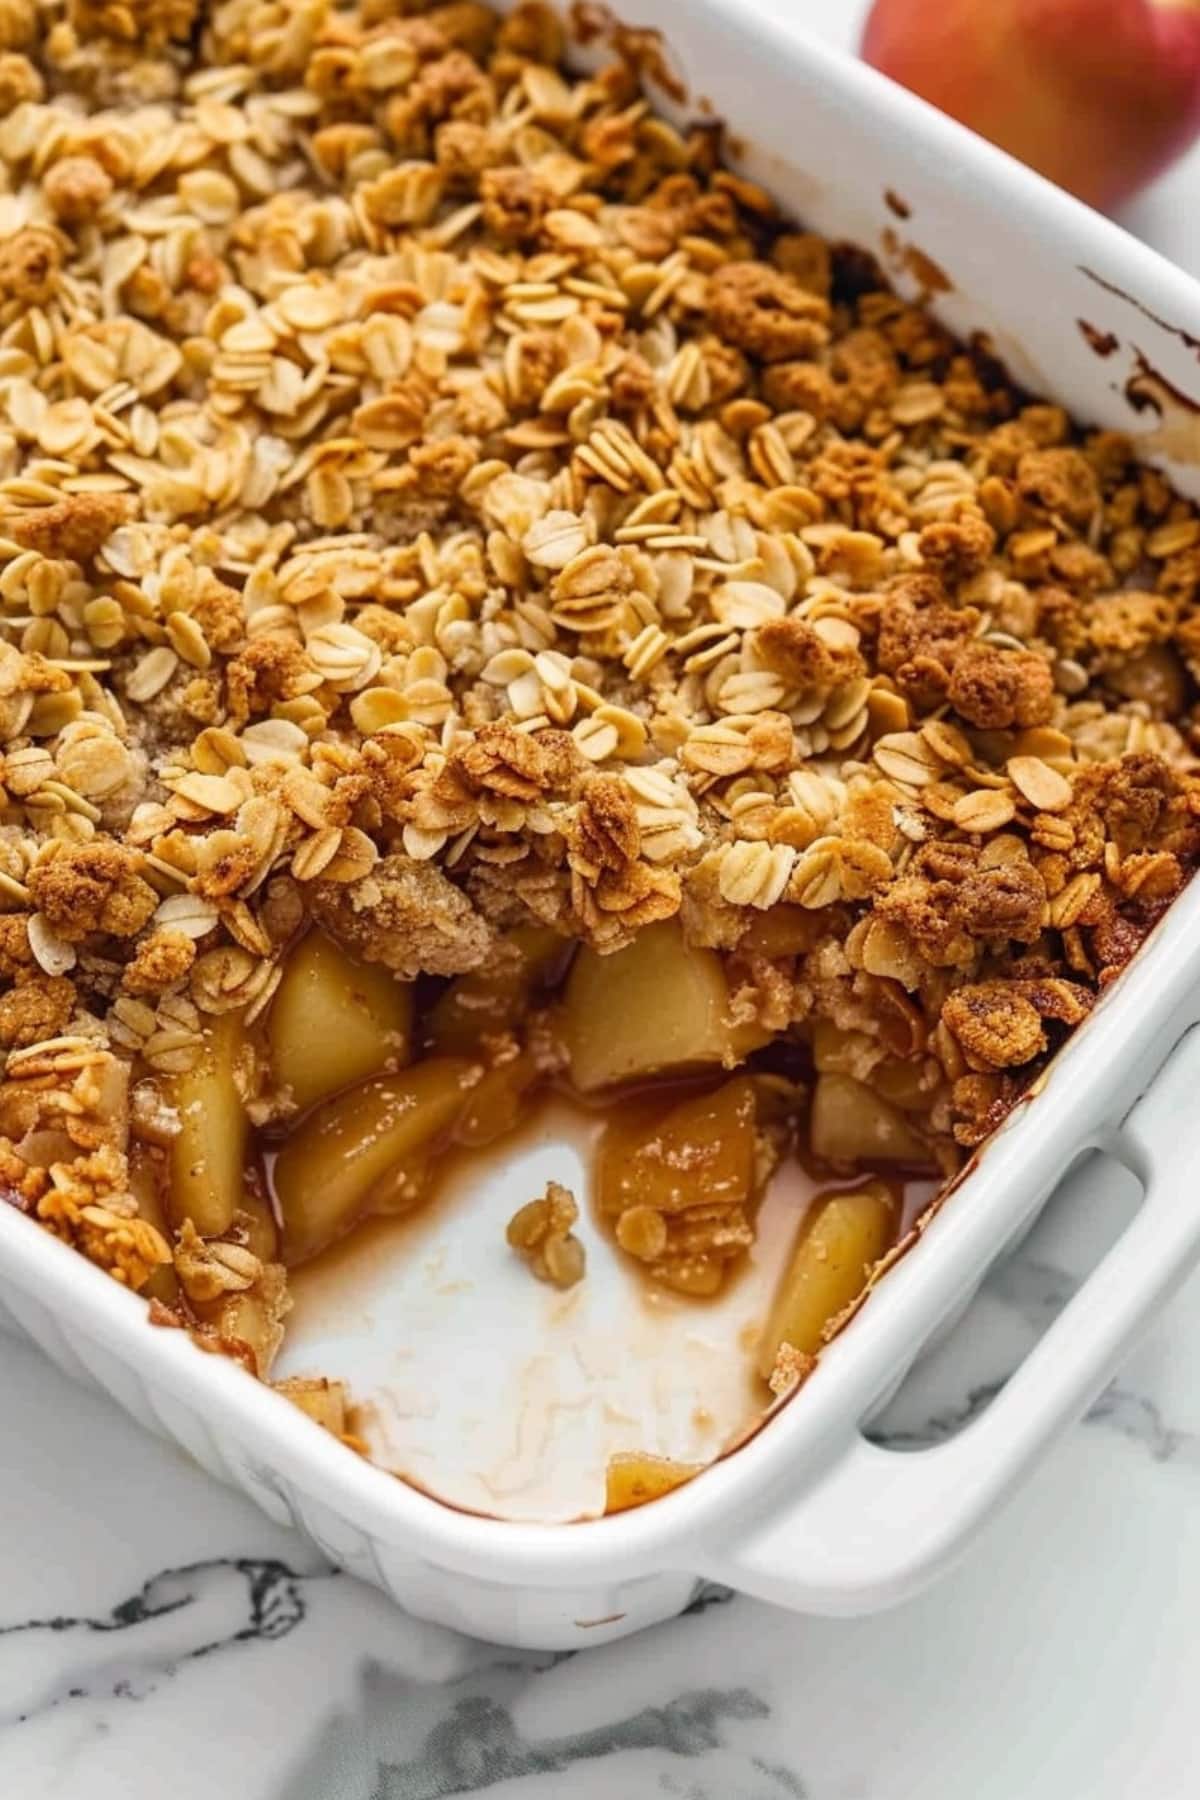 Pear crisp in a rectangular white baking dish topped with rolled oats.